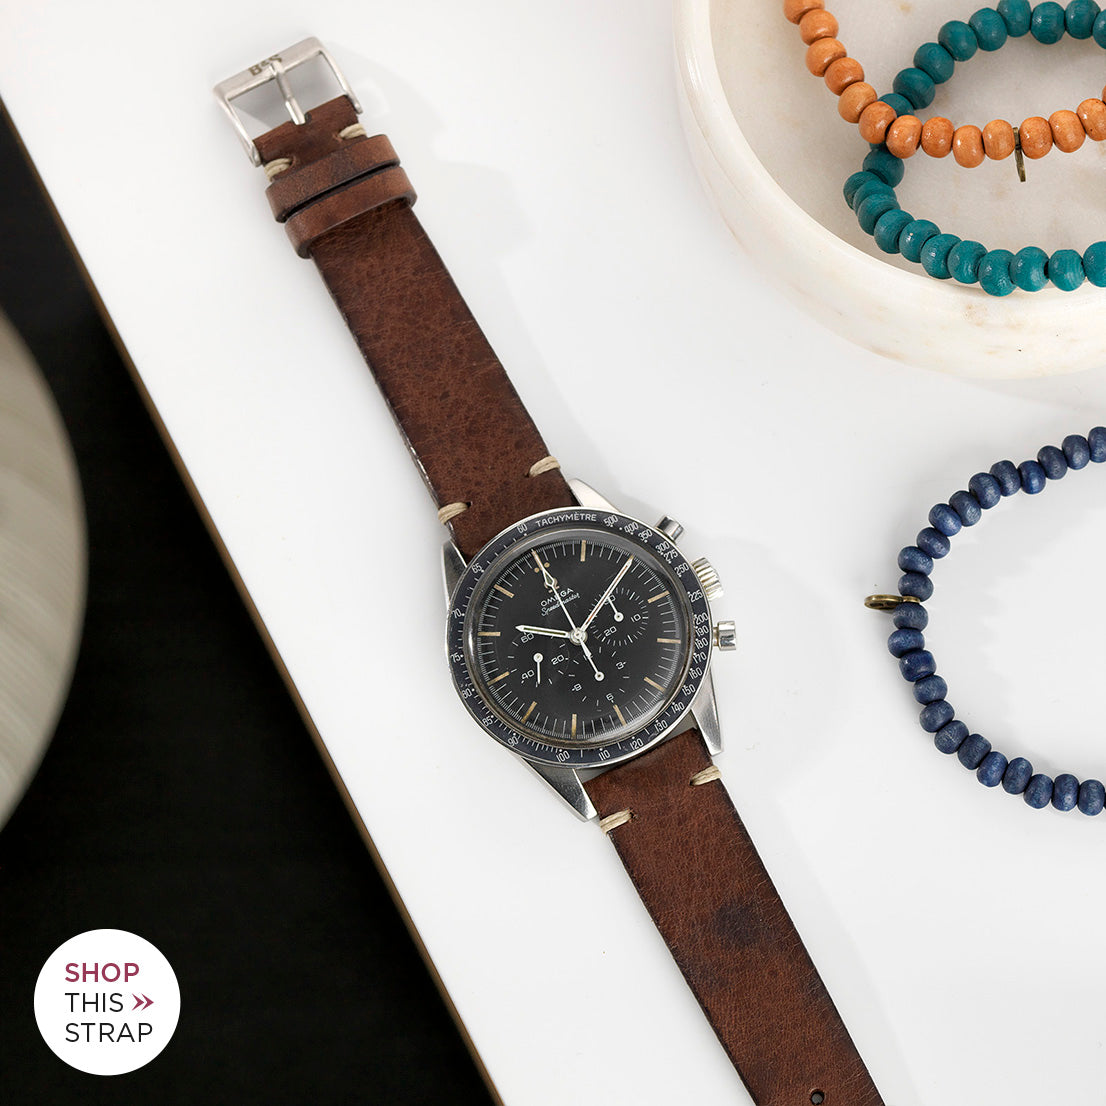 Bulang and Sons_Strap Guide_The Omega Straight Lugs speedmaster_Lumberjack Brown Leather Watch Strap